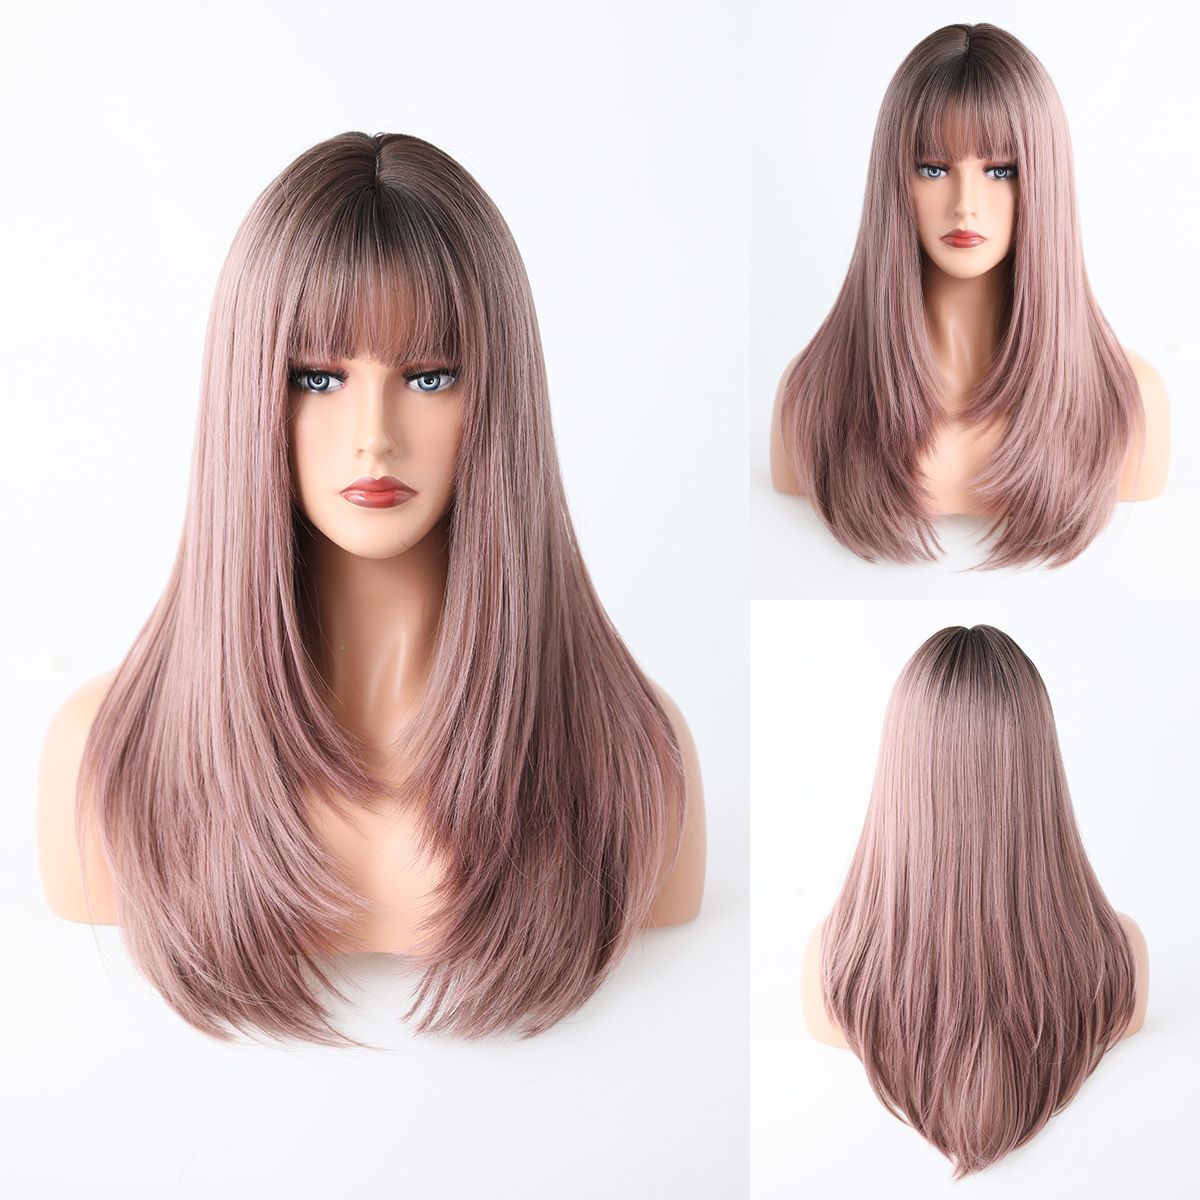 A synthetic wig designed for women, showcasing multicolor straight hair and flattering air bangs